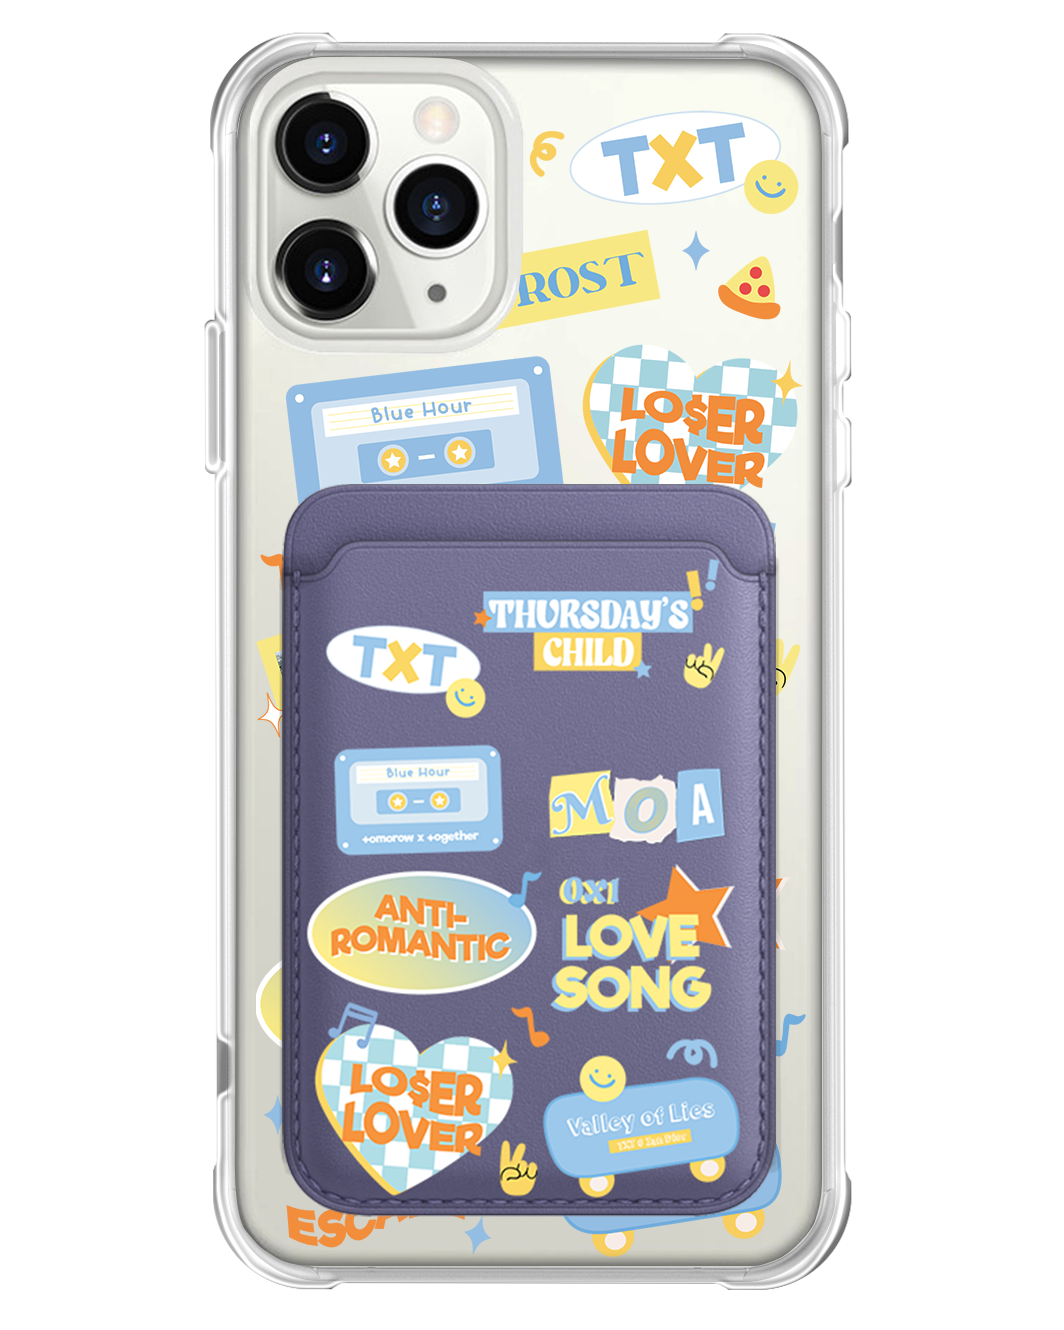 iPhone Magnetic Wallet Case - TXT Sticker Pack